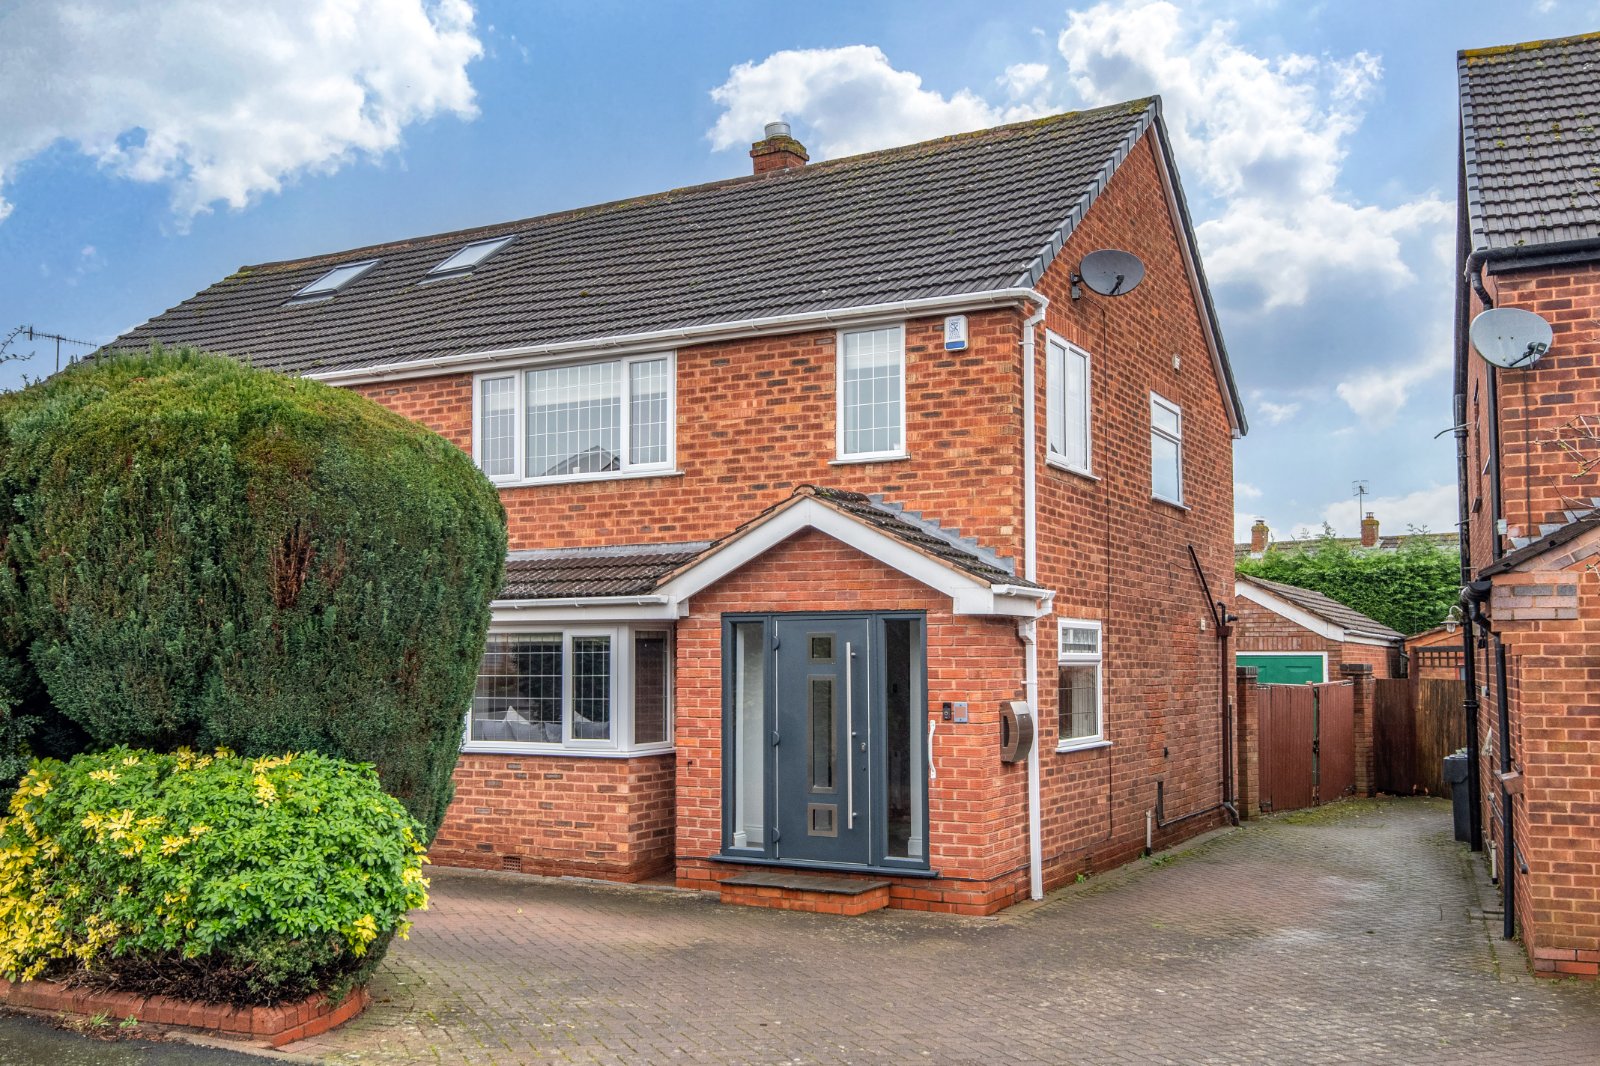 3 bed house for sale in Carol Avenue, Bromsgrove - Property Image 1